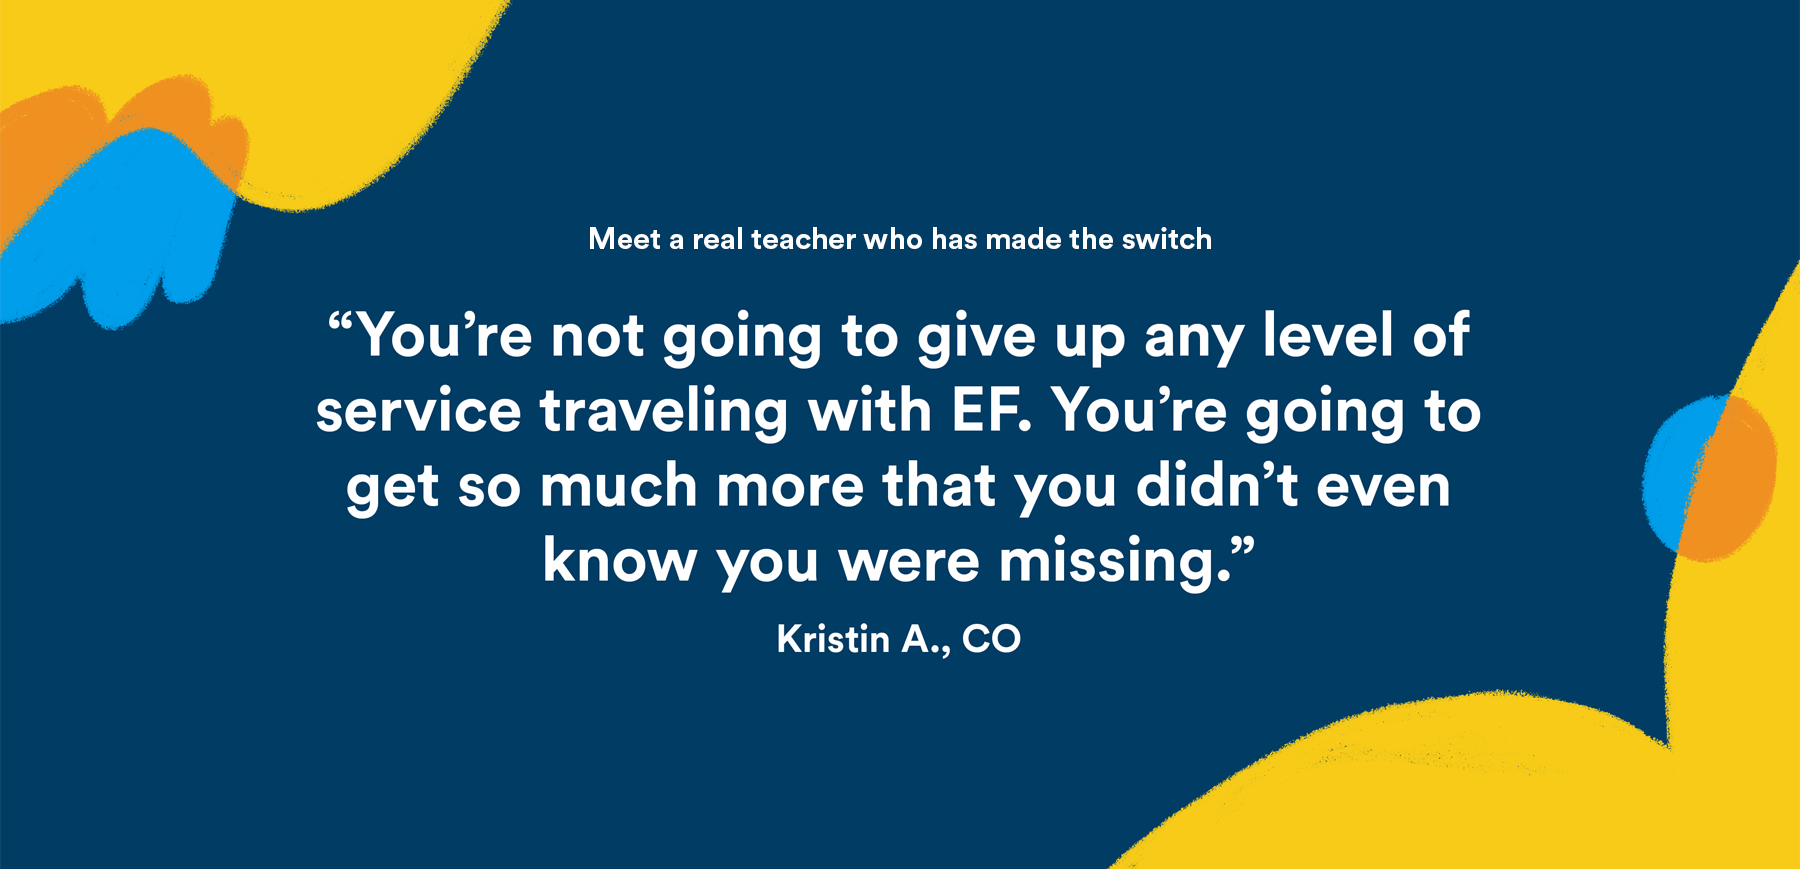 You're not going to give up any level of service traveling with EF. You’re going to get so much more that you didn’t even know you were missing. - Kristin A, CO